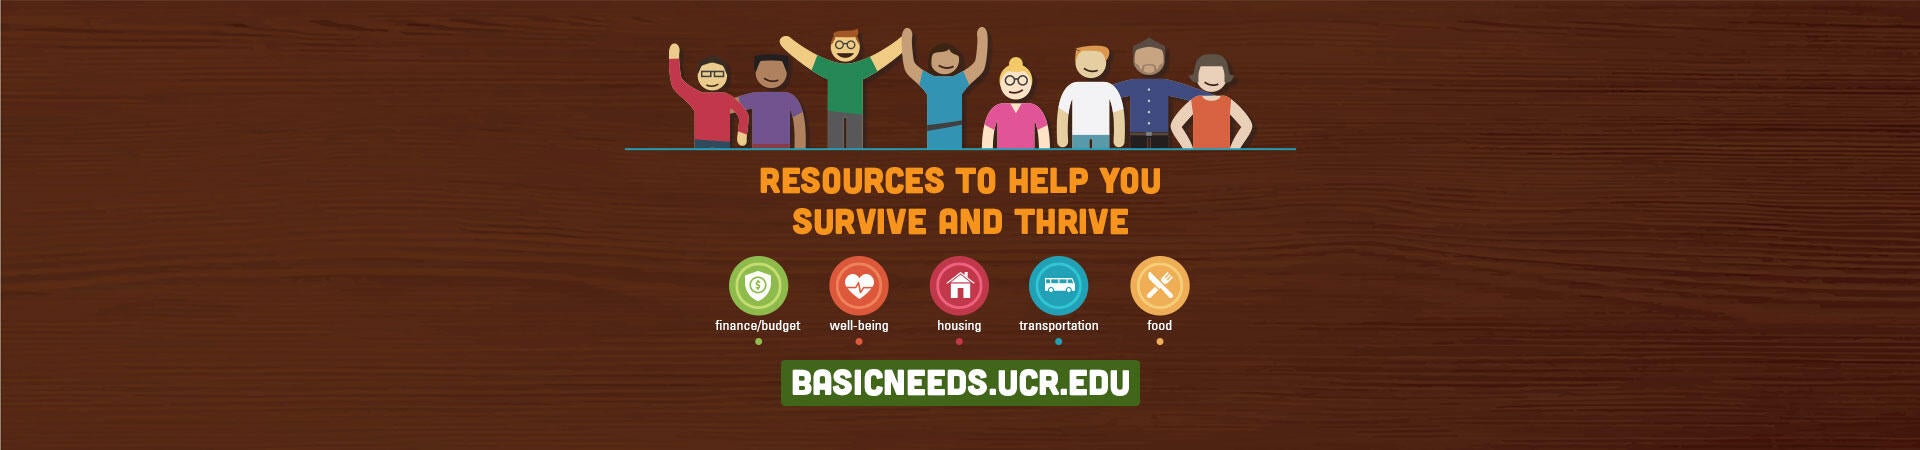 Resources to help to survive and thrive: BASICNEEDS.UCR.EDU